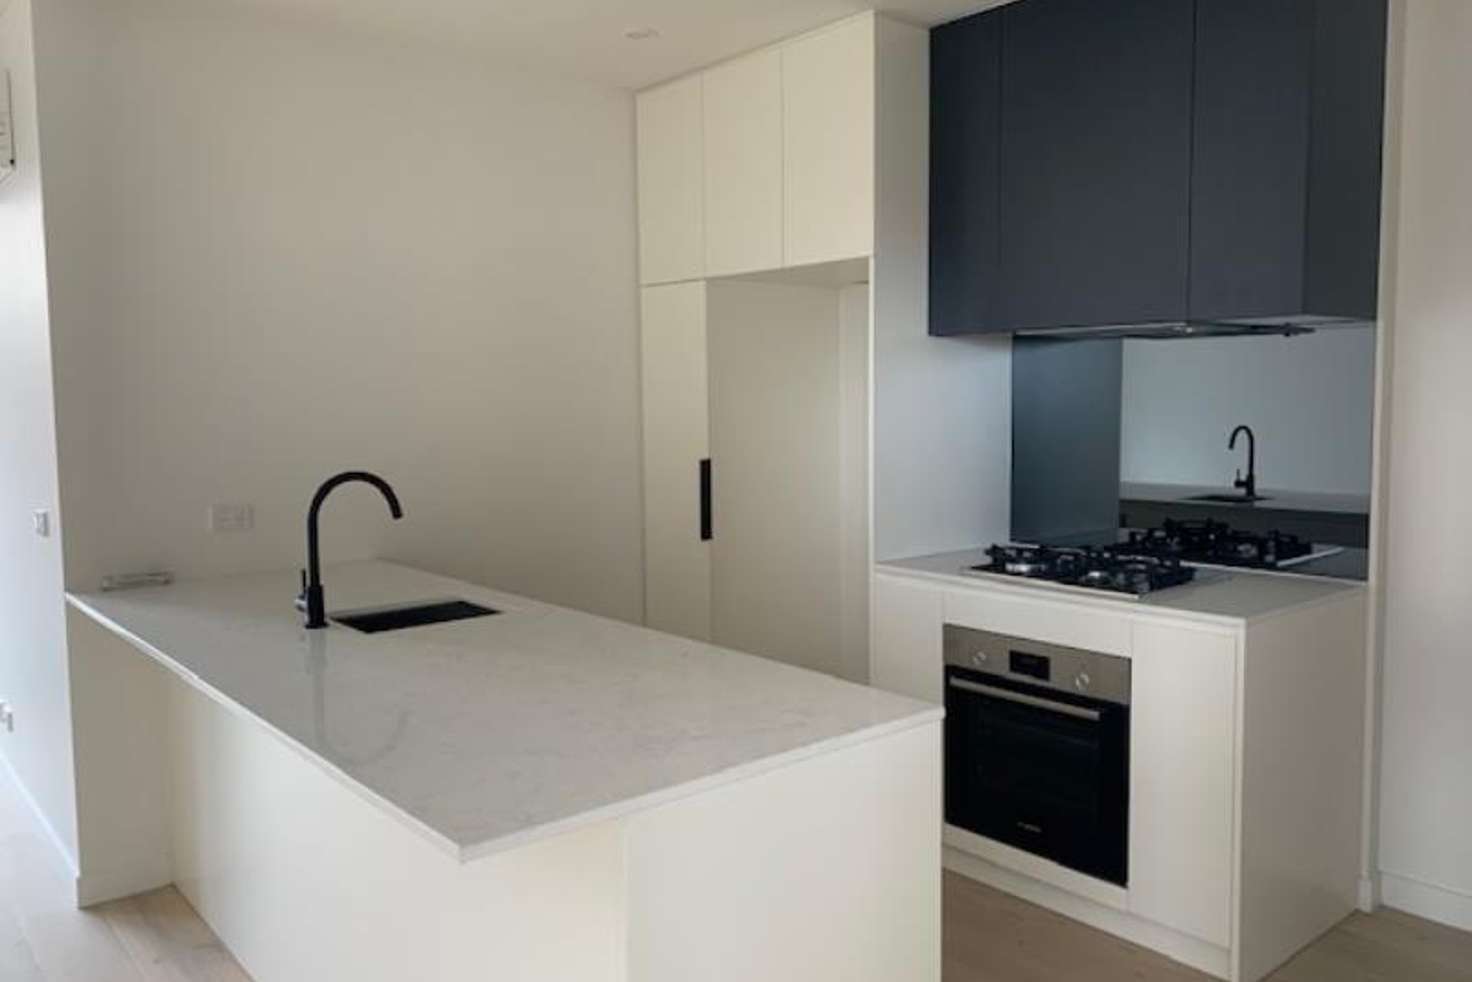 Main view of Homely apartment listing, 110/2 Joseph Road, Footscray VIC 3011